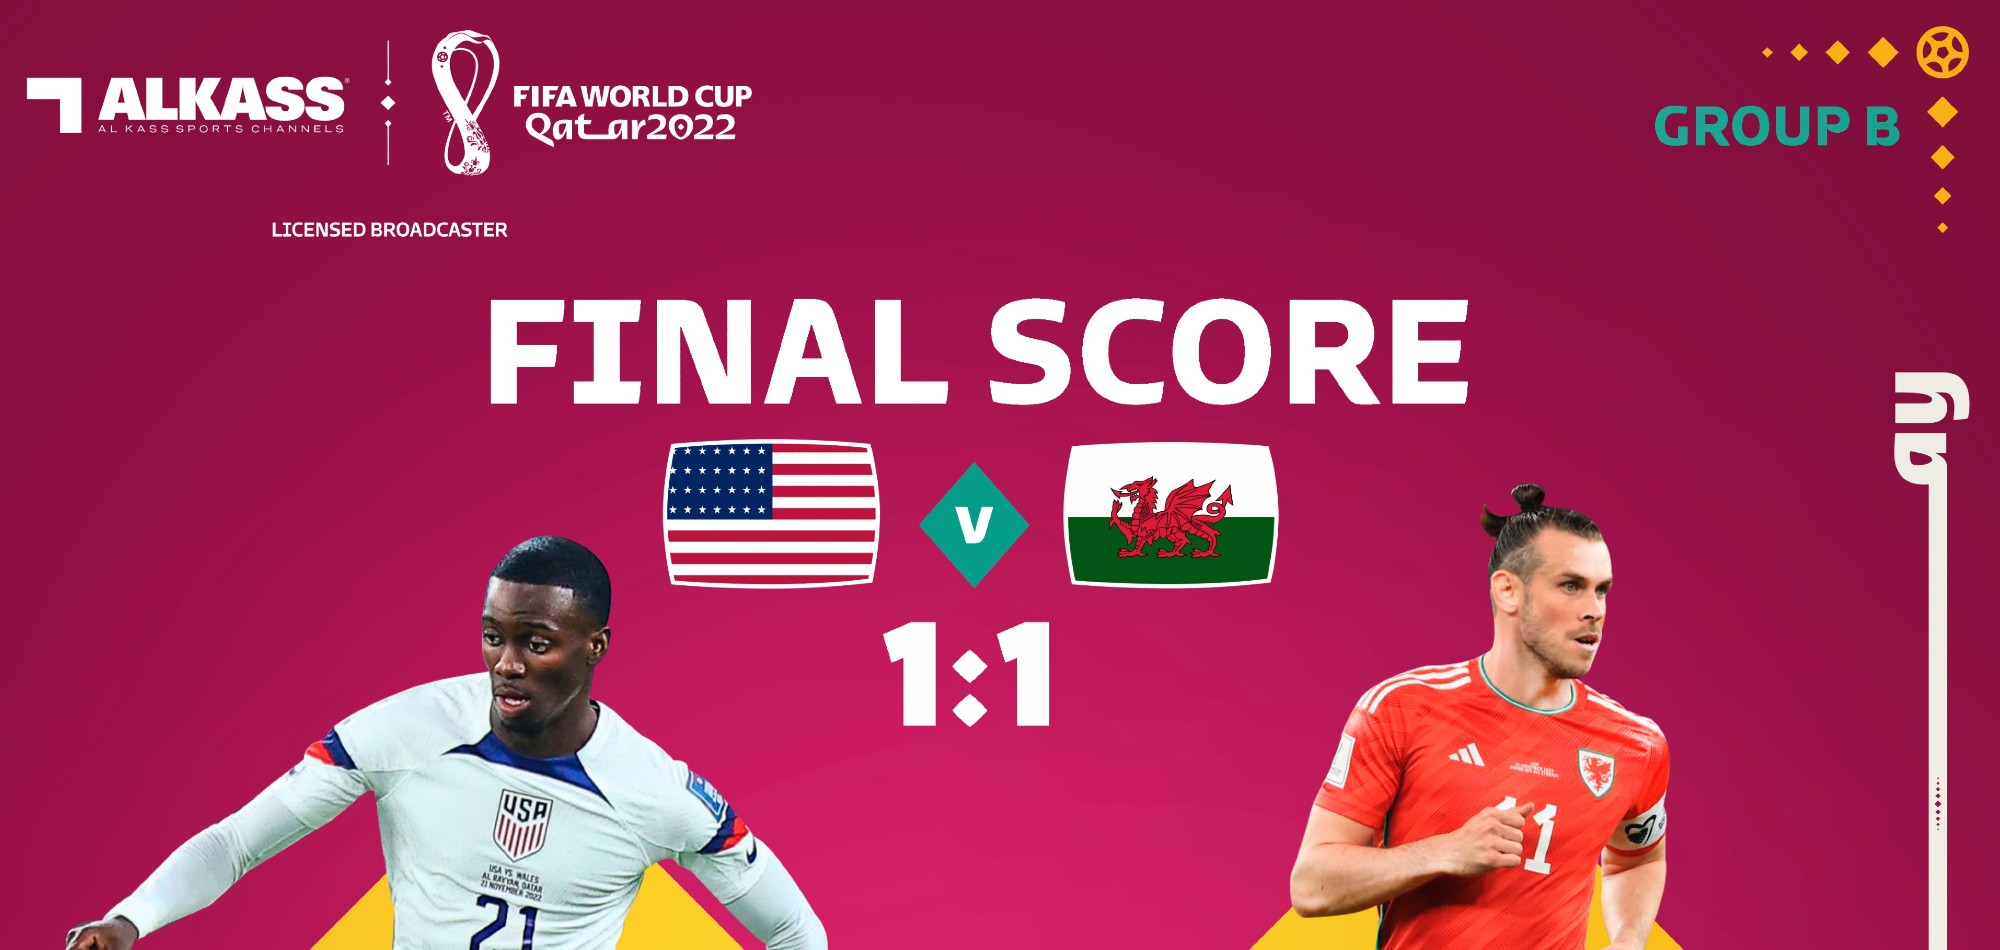 Wales salvage well-deserved draw with USA in first appearance since 1958